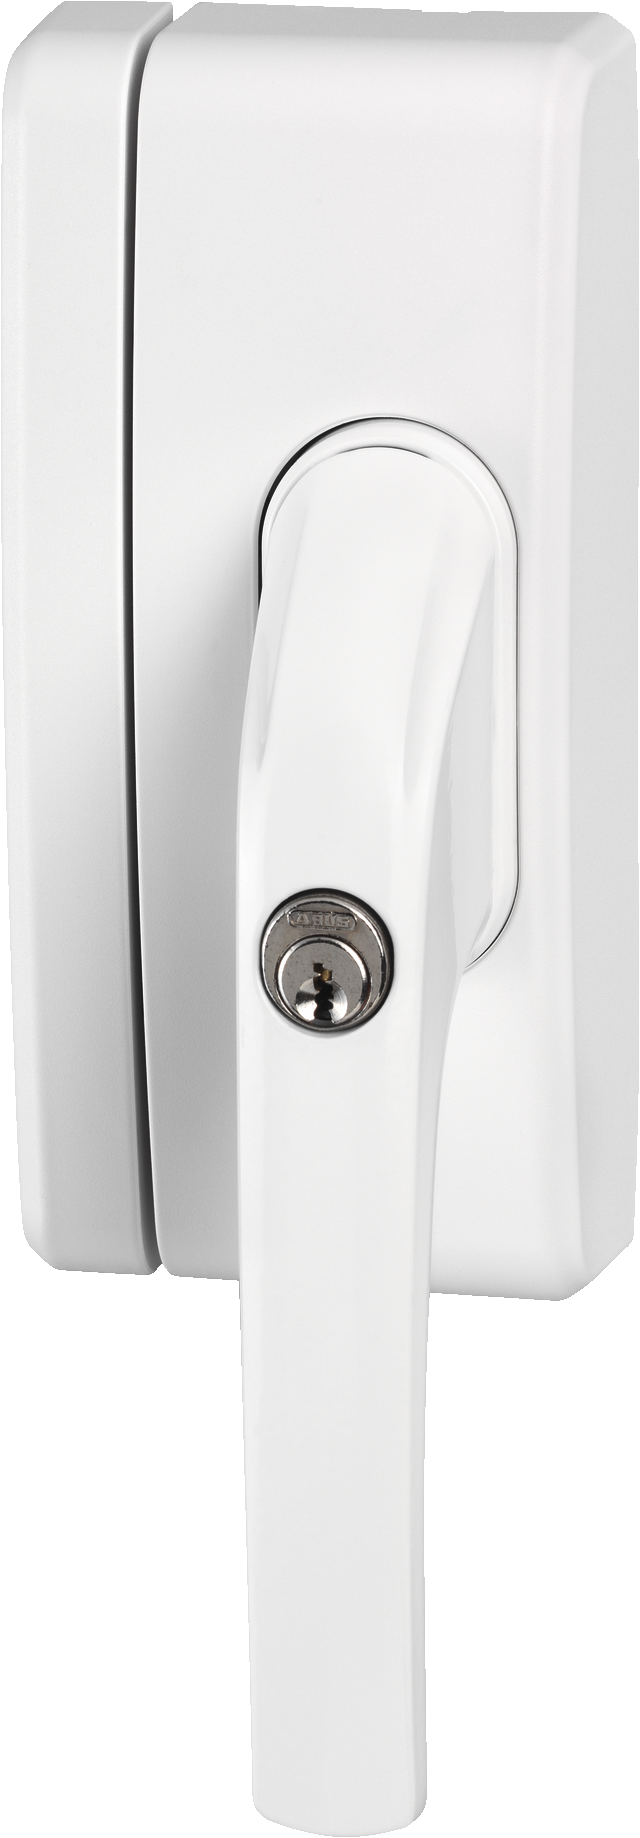 security window handle FO400N white oblique front view